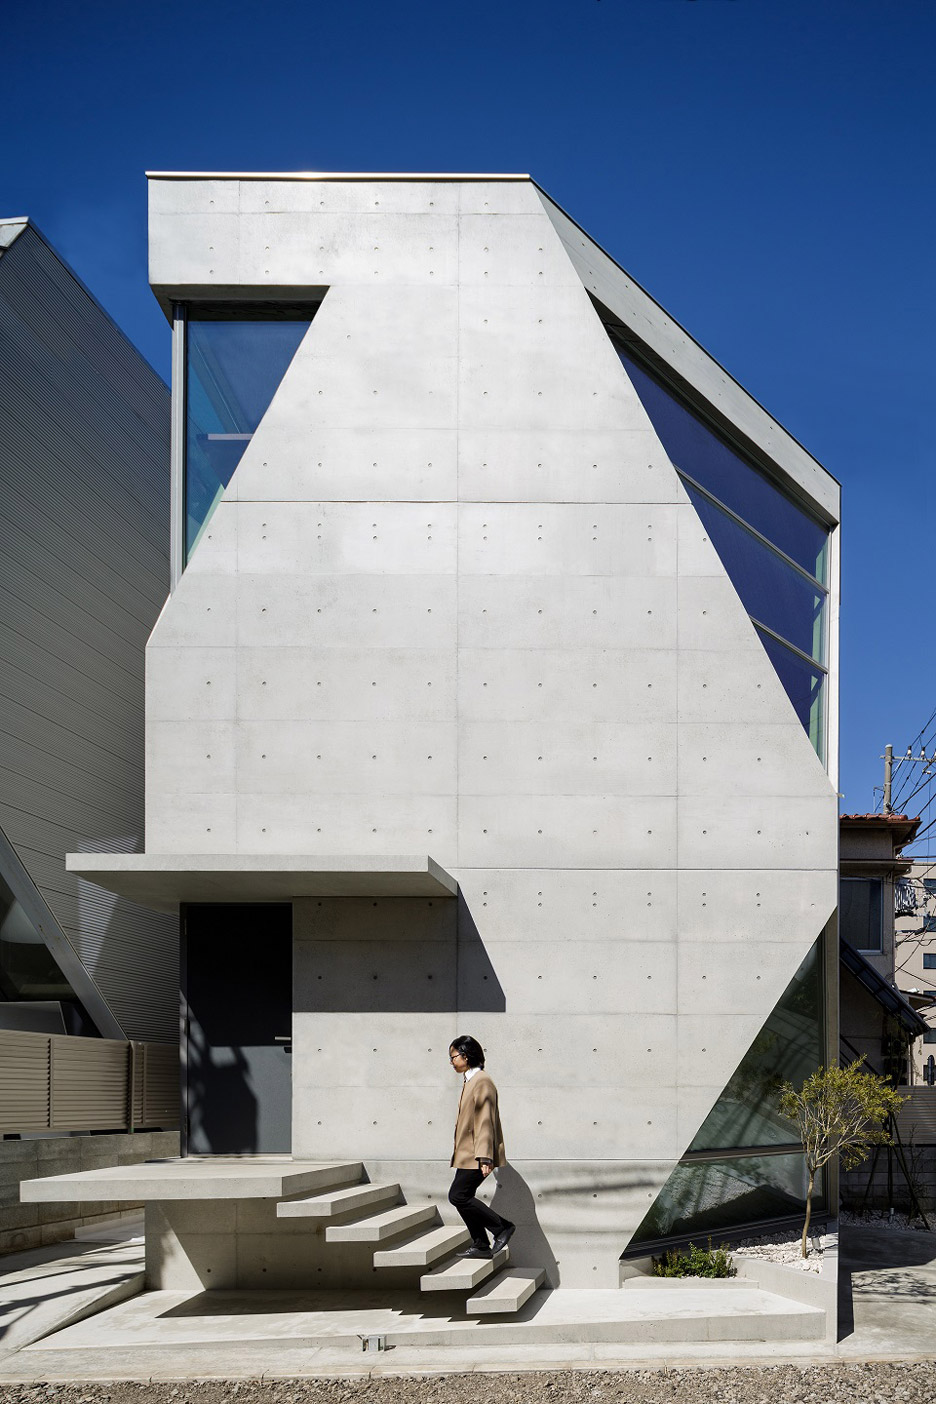 Atelier Tekuto Completes Crystalline Concrete Home For Two Chemists